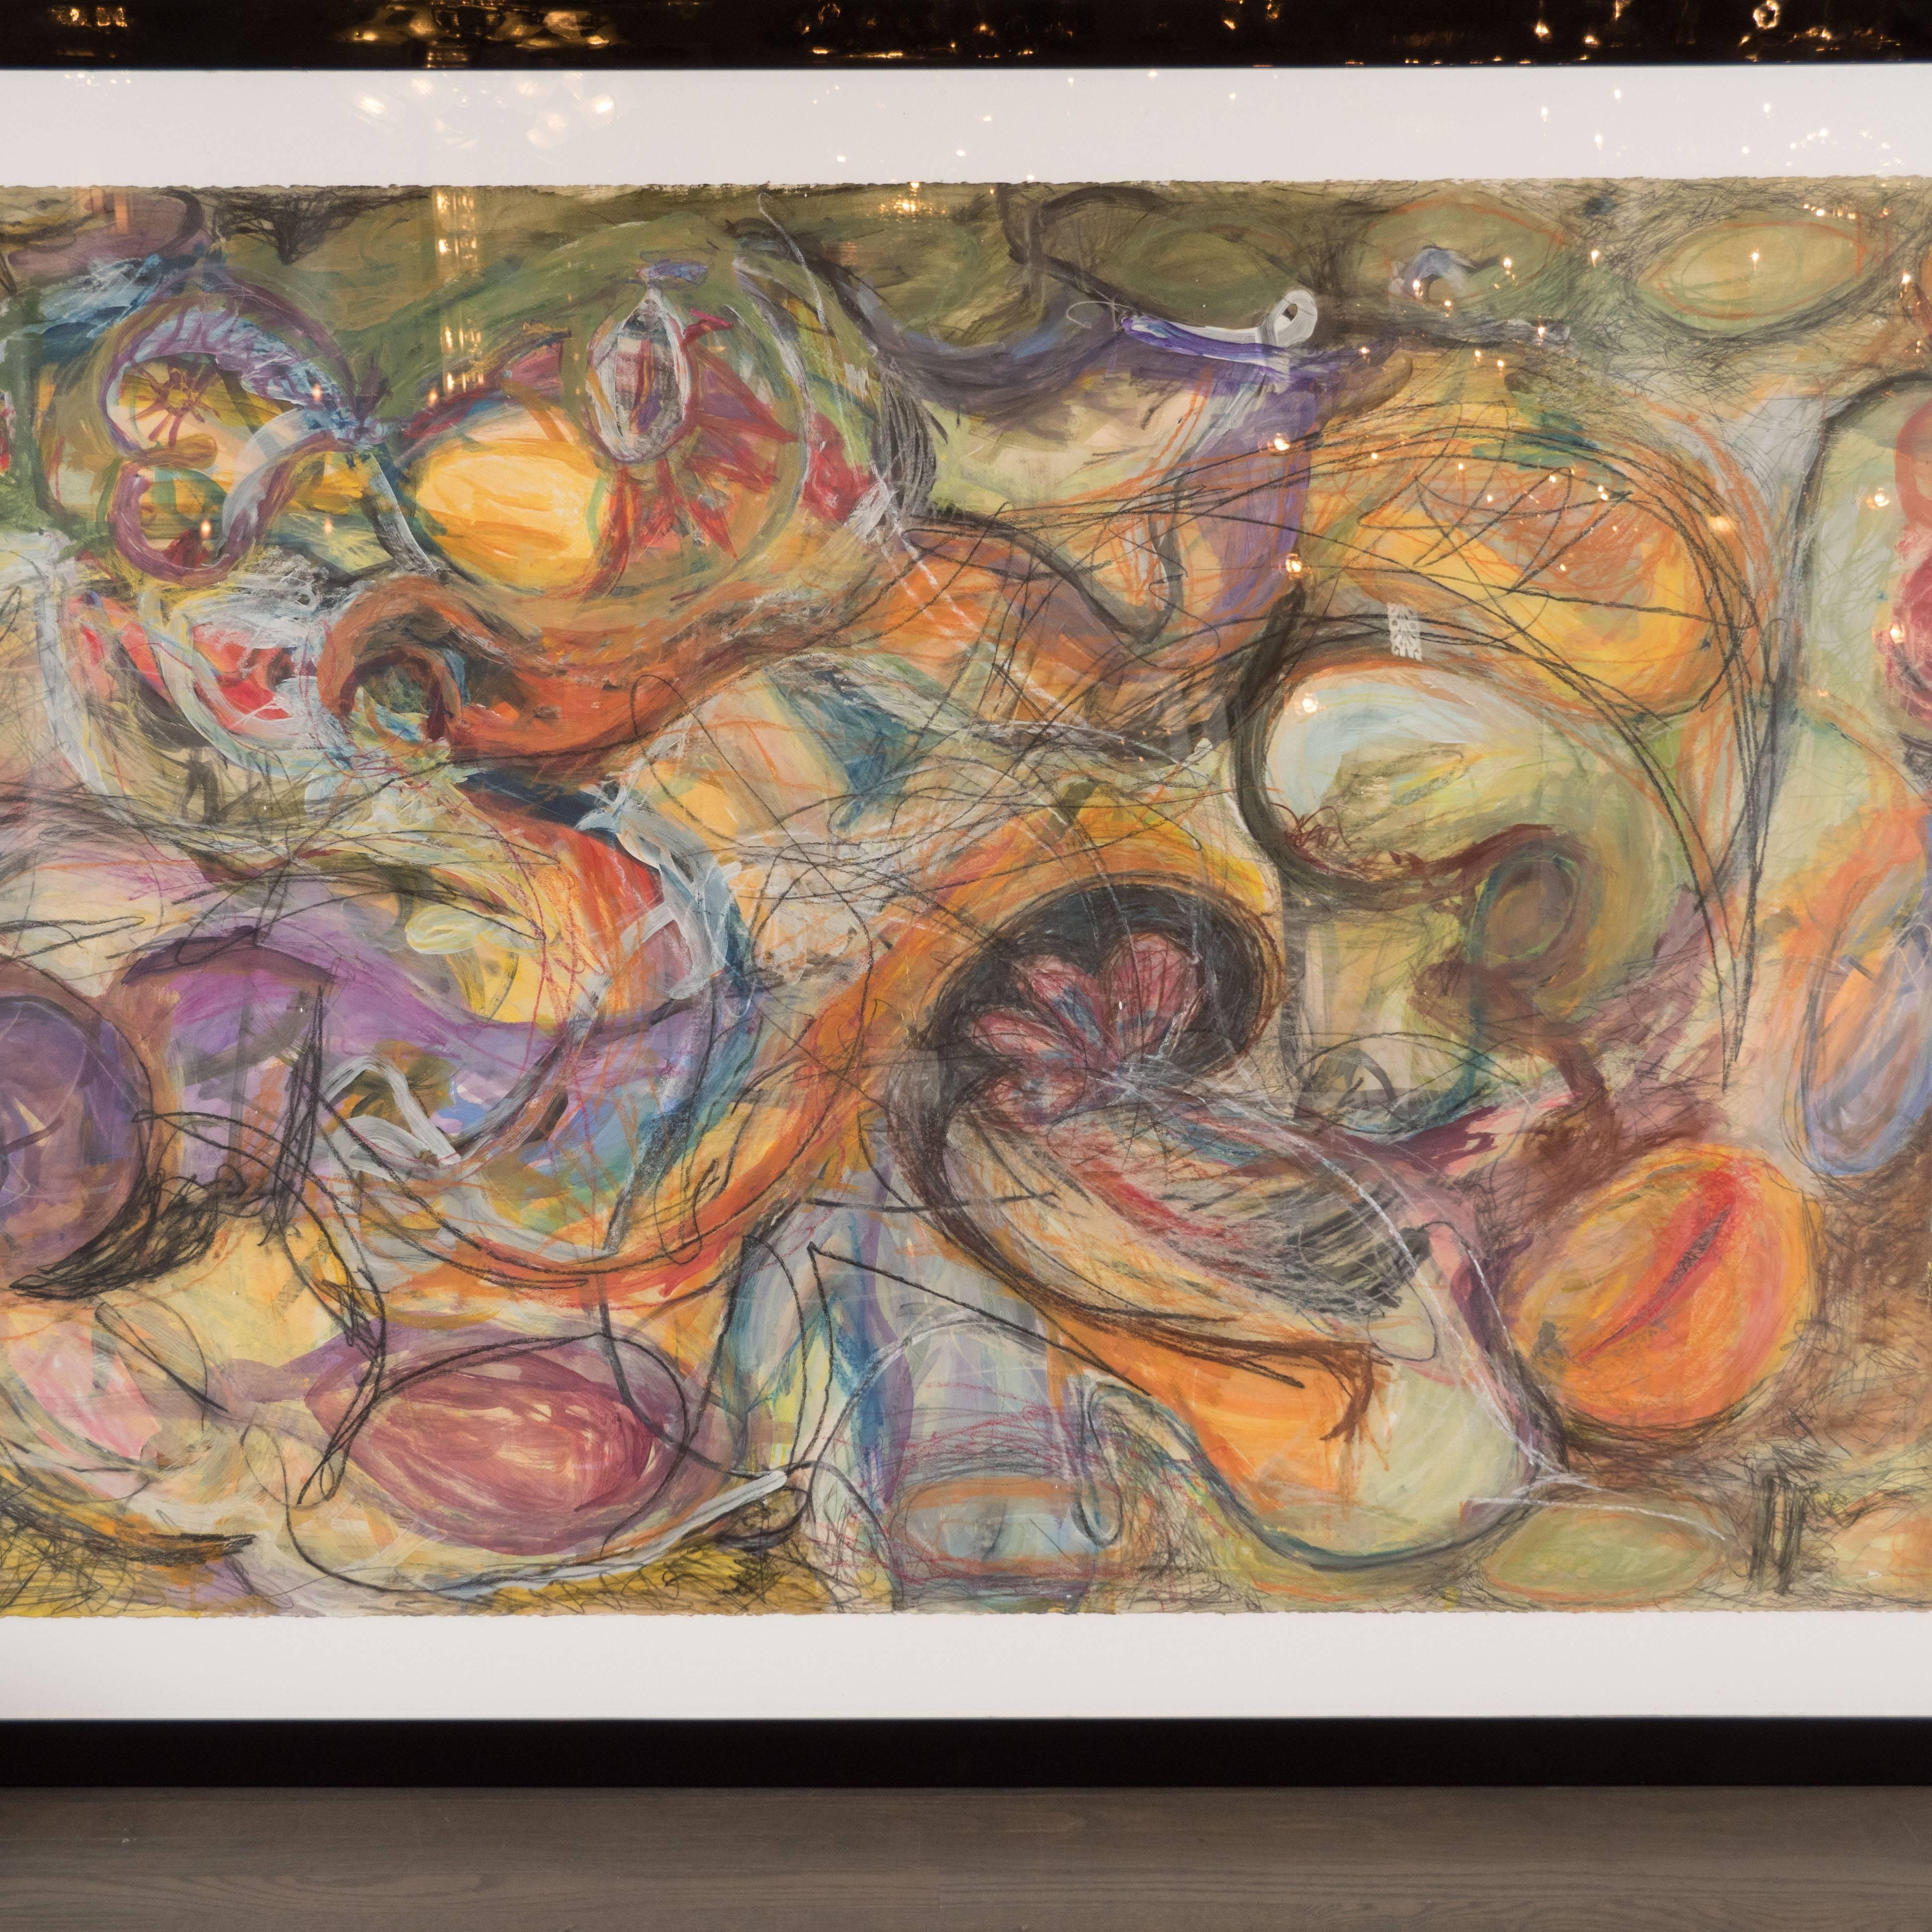 This captivating and monumental abstract expressionist painting was realized circa 1965, in the manner of Lee Krasner. Rendered in an ebullient and surprising palate- offering contrasting hues of amethyst, lavender, limestone, lapis lazuli and